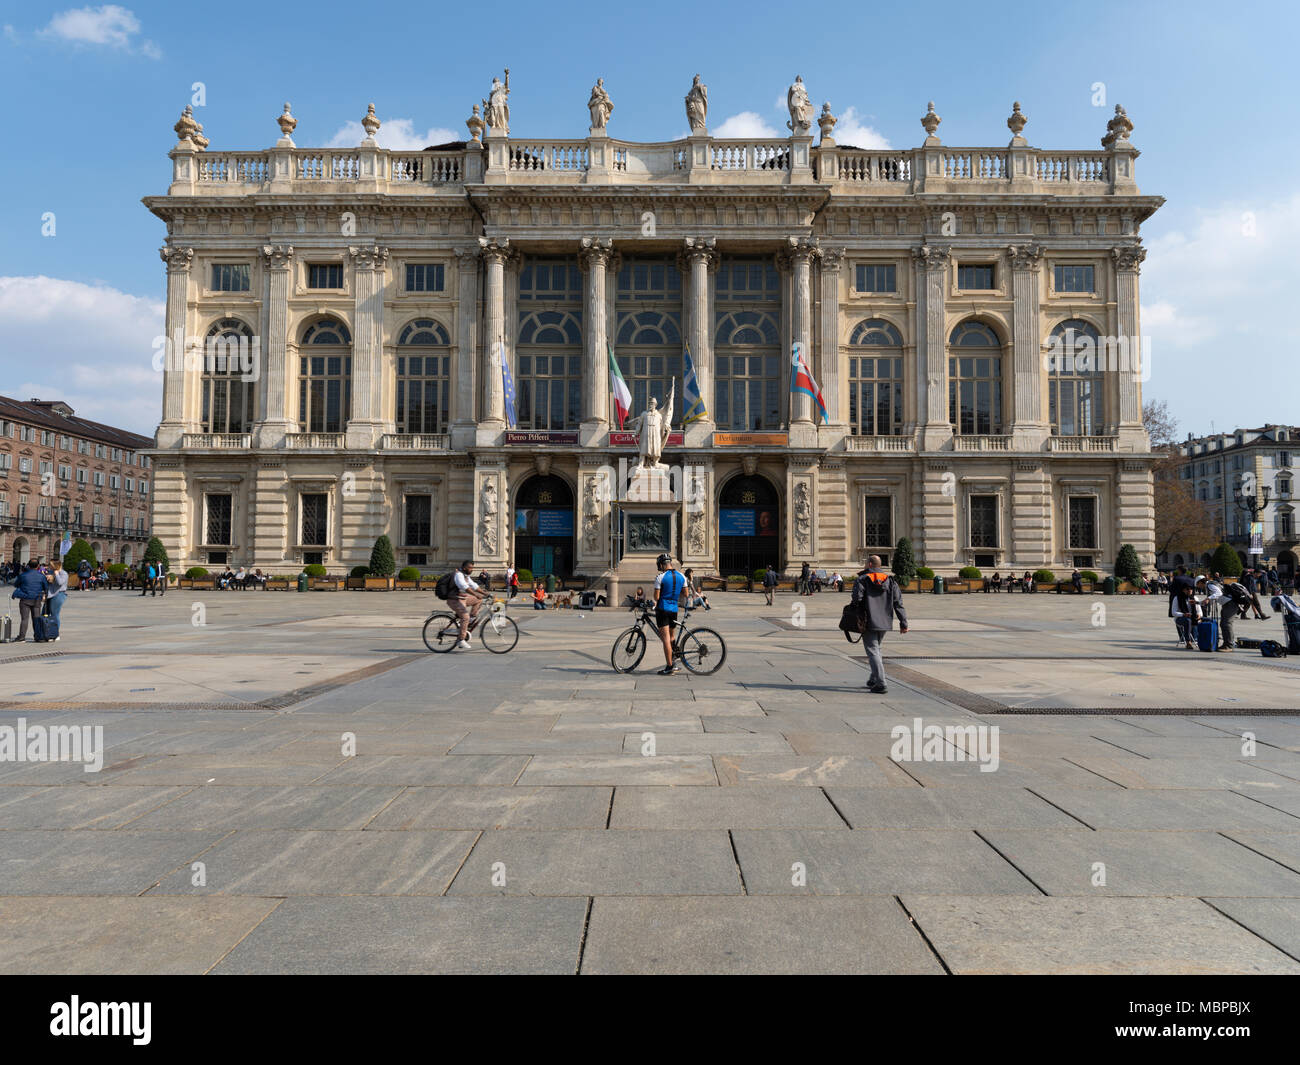 A historic palace which was the first Senate of the Italian Kingdom. It houses the Turin City Museum of Ancient Art. Stock Photo